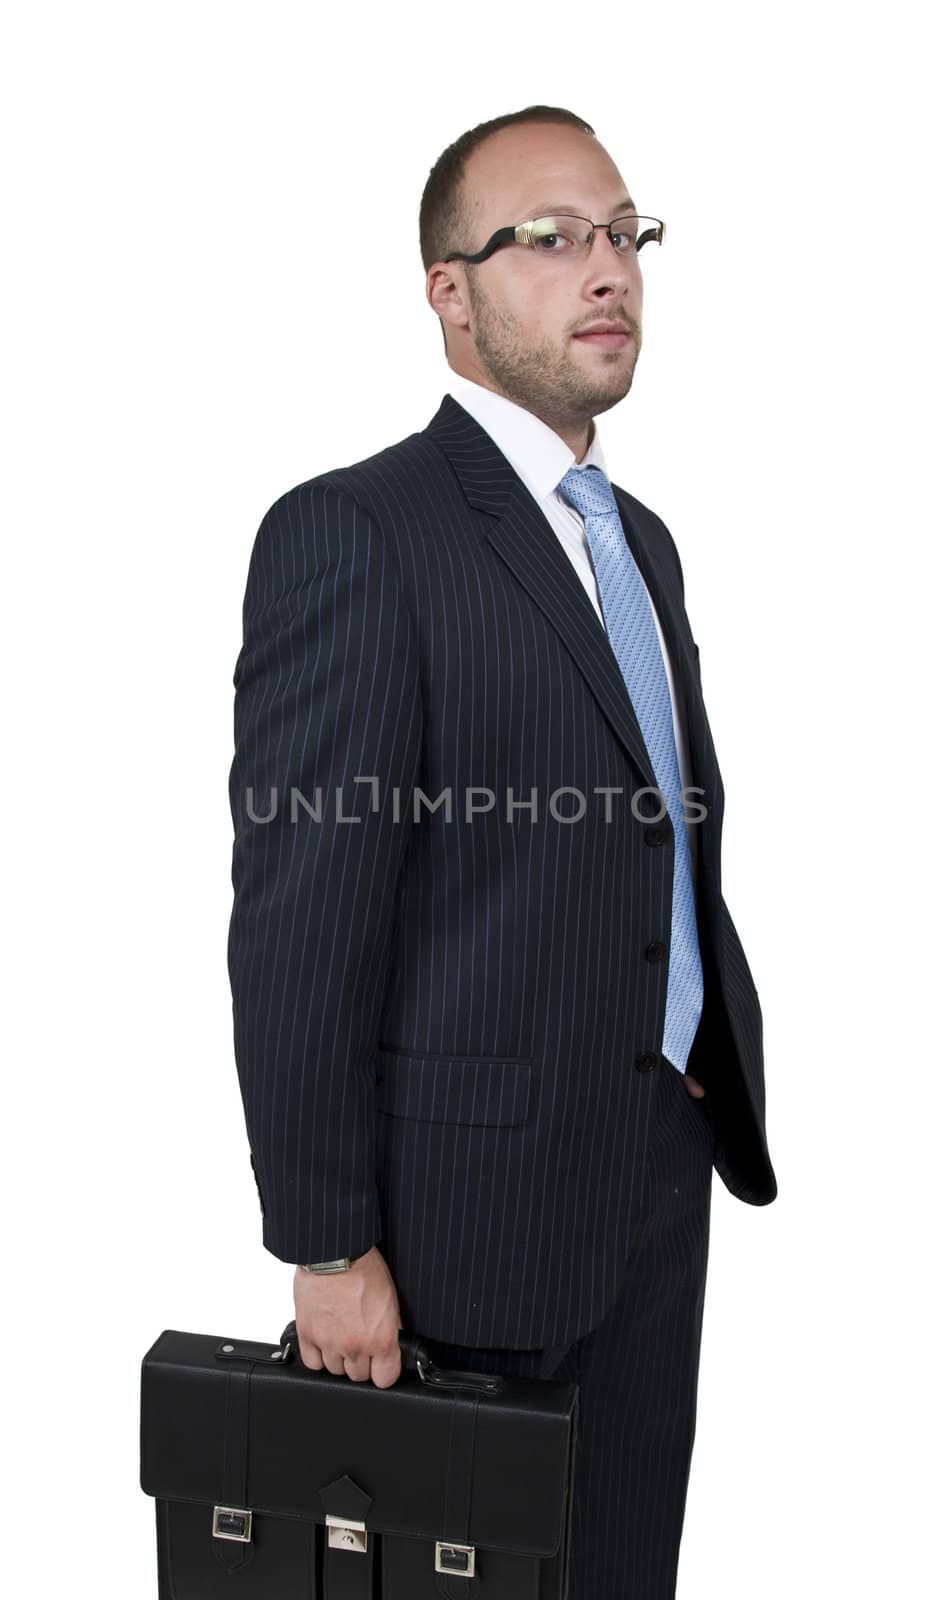 businessman with bag on isolated background

